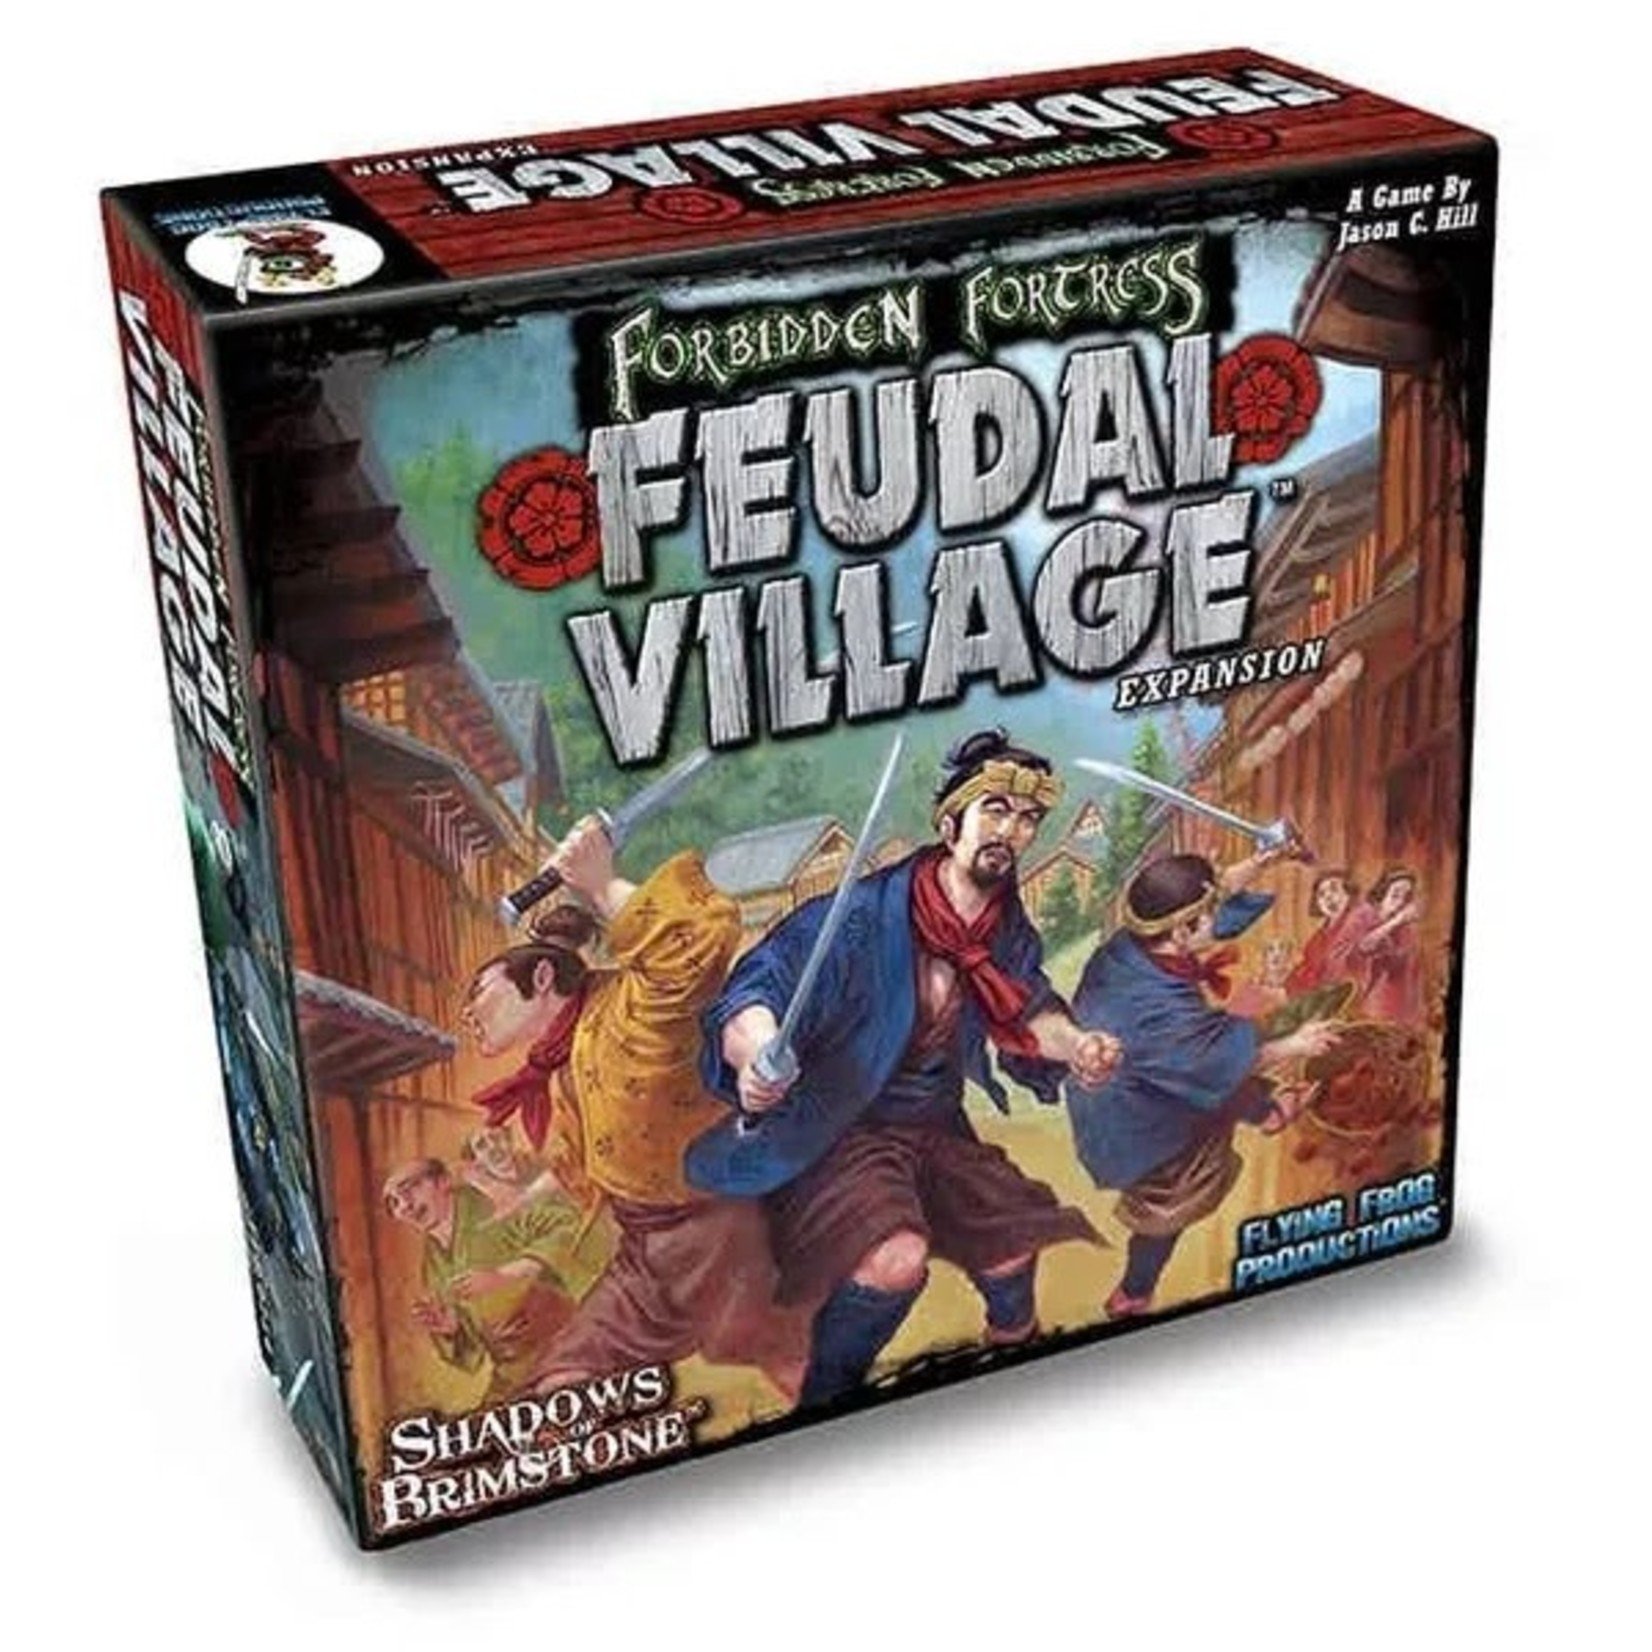 Flying Frog Productions Forbidden Fortress Feudal Village Expansion